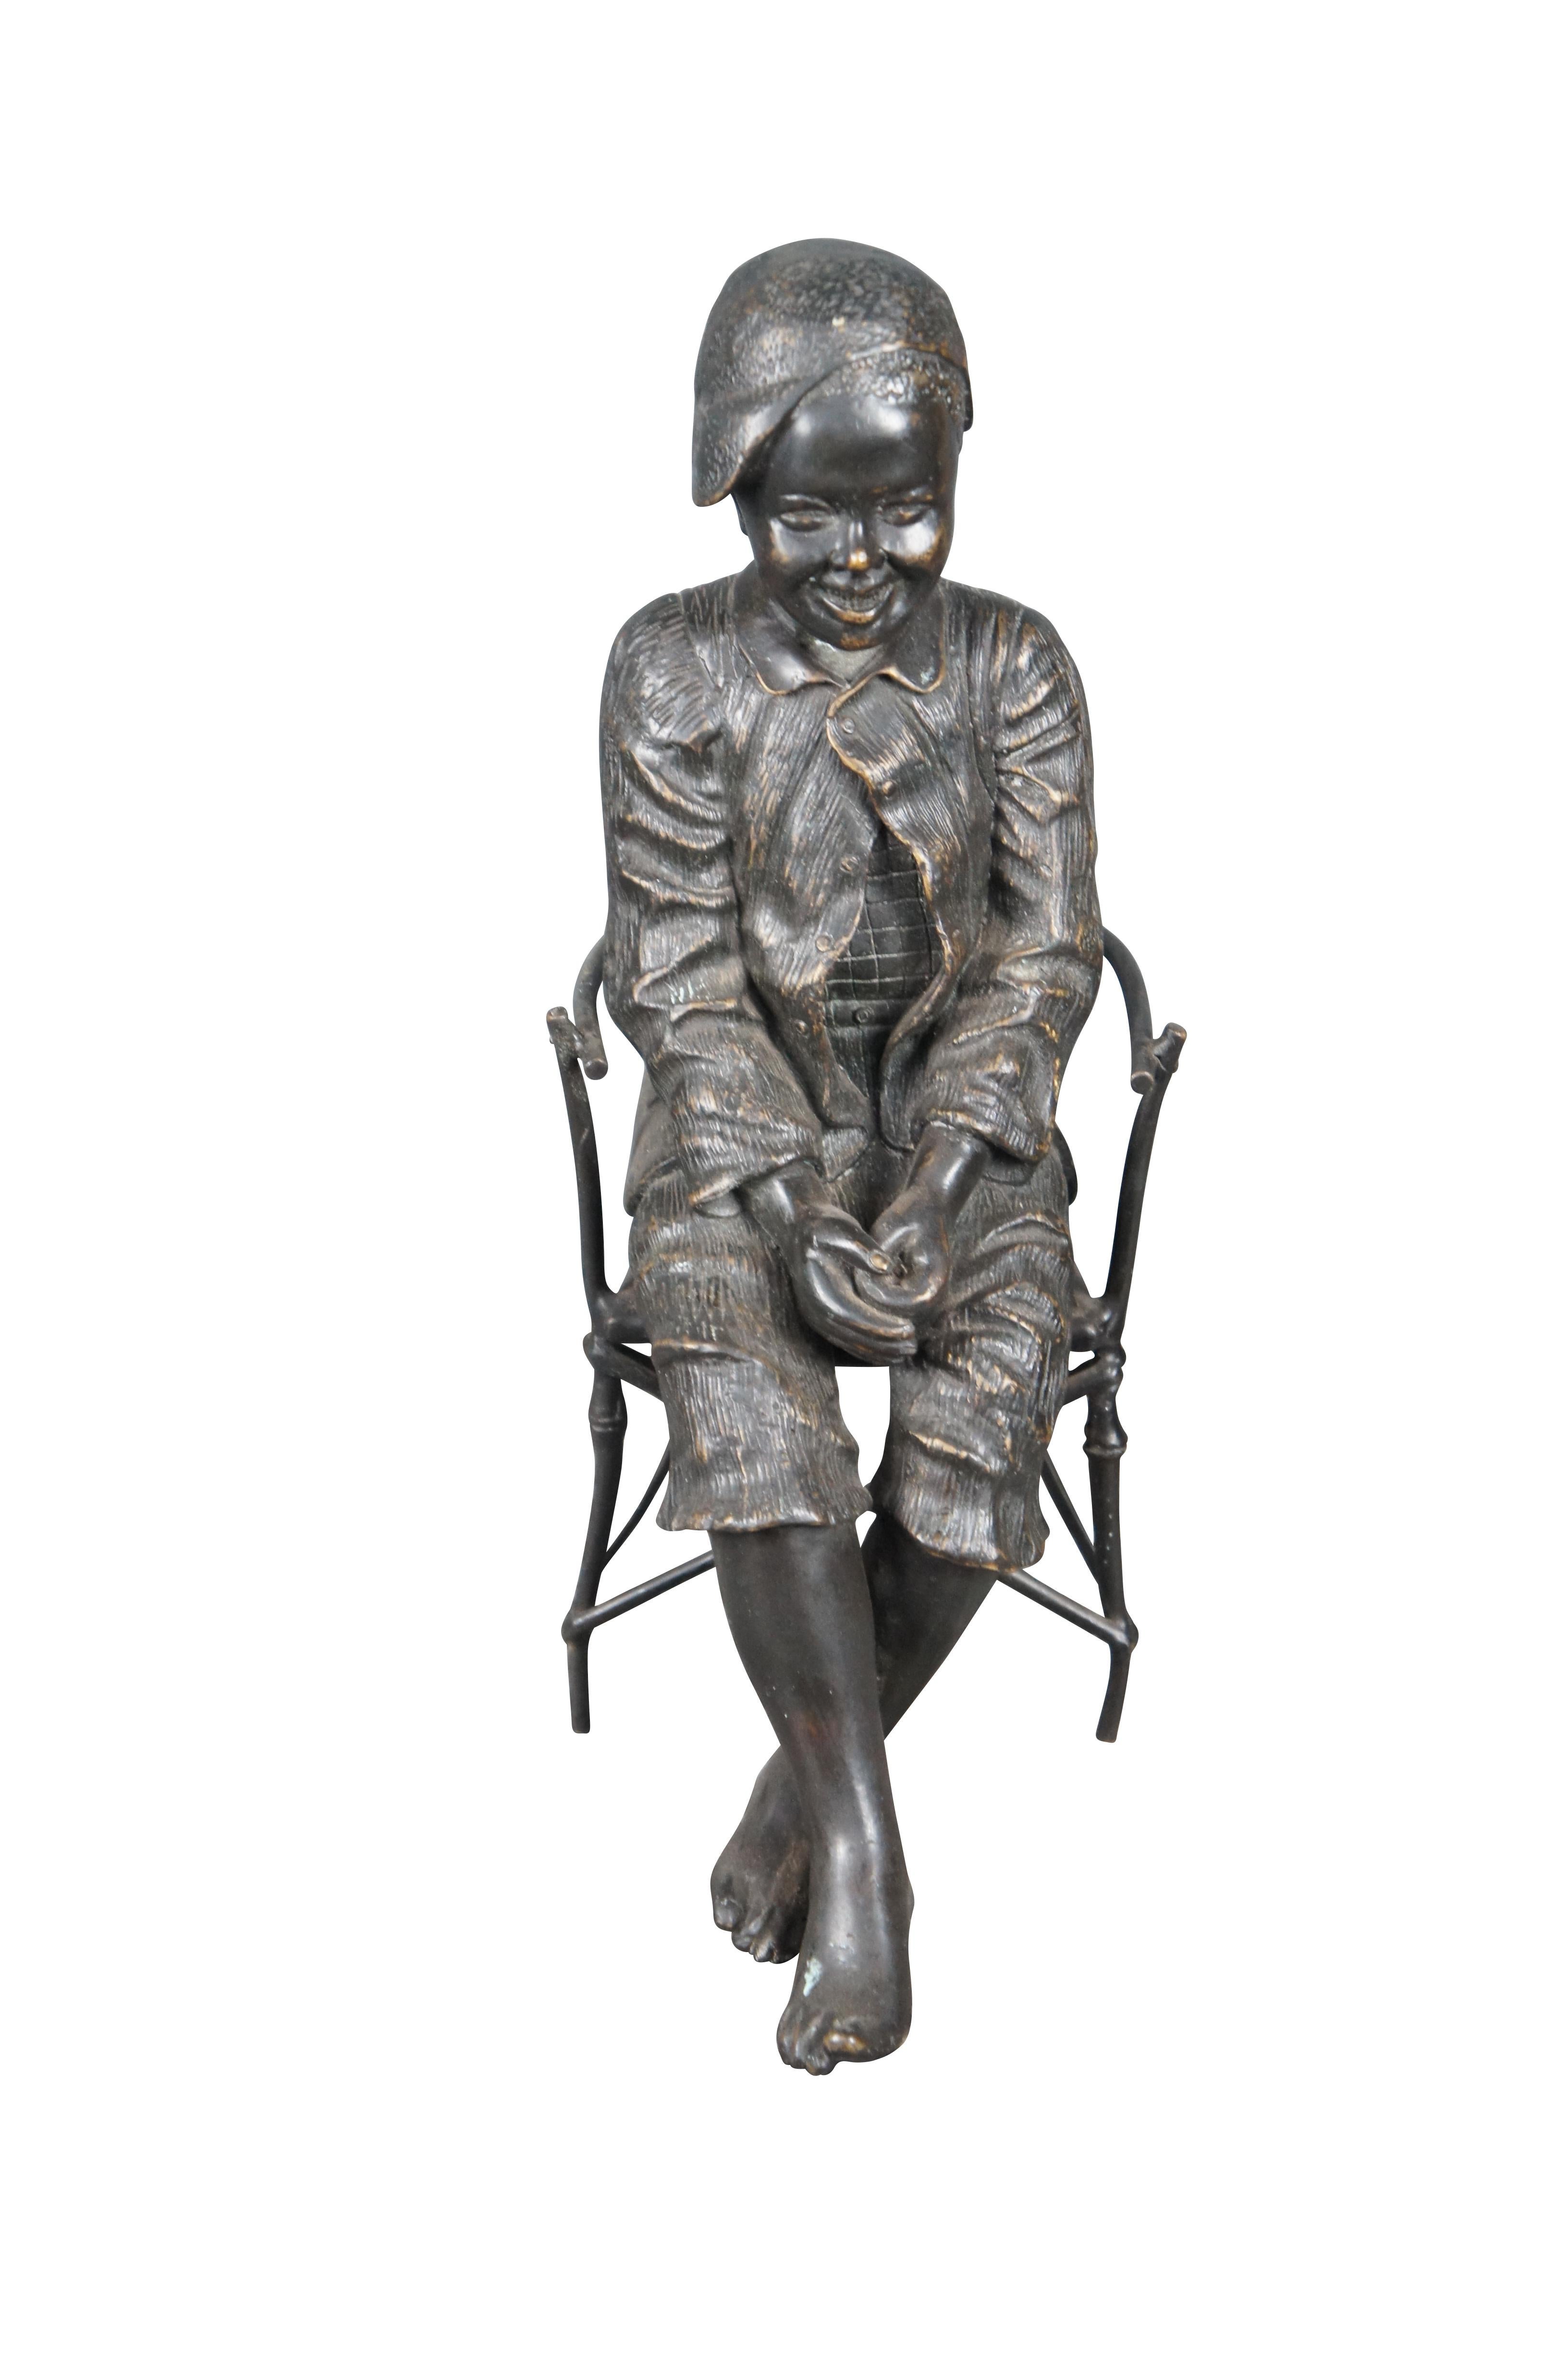 The Boy Fishing Bronze Statue is an antique sculpture by Austrian sculptor and potter Friedrich Goldscheider. It depicts a young boy fishing in a genre scene. The original sculpture is made of terracotta and dates back to around 1893. It was crafted